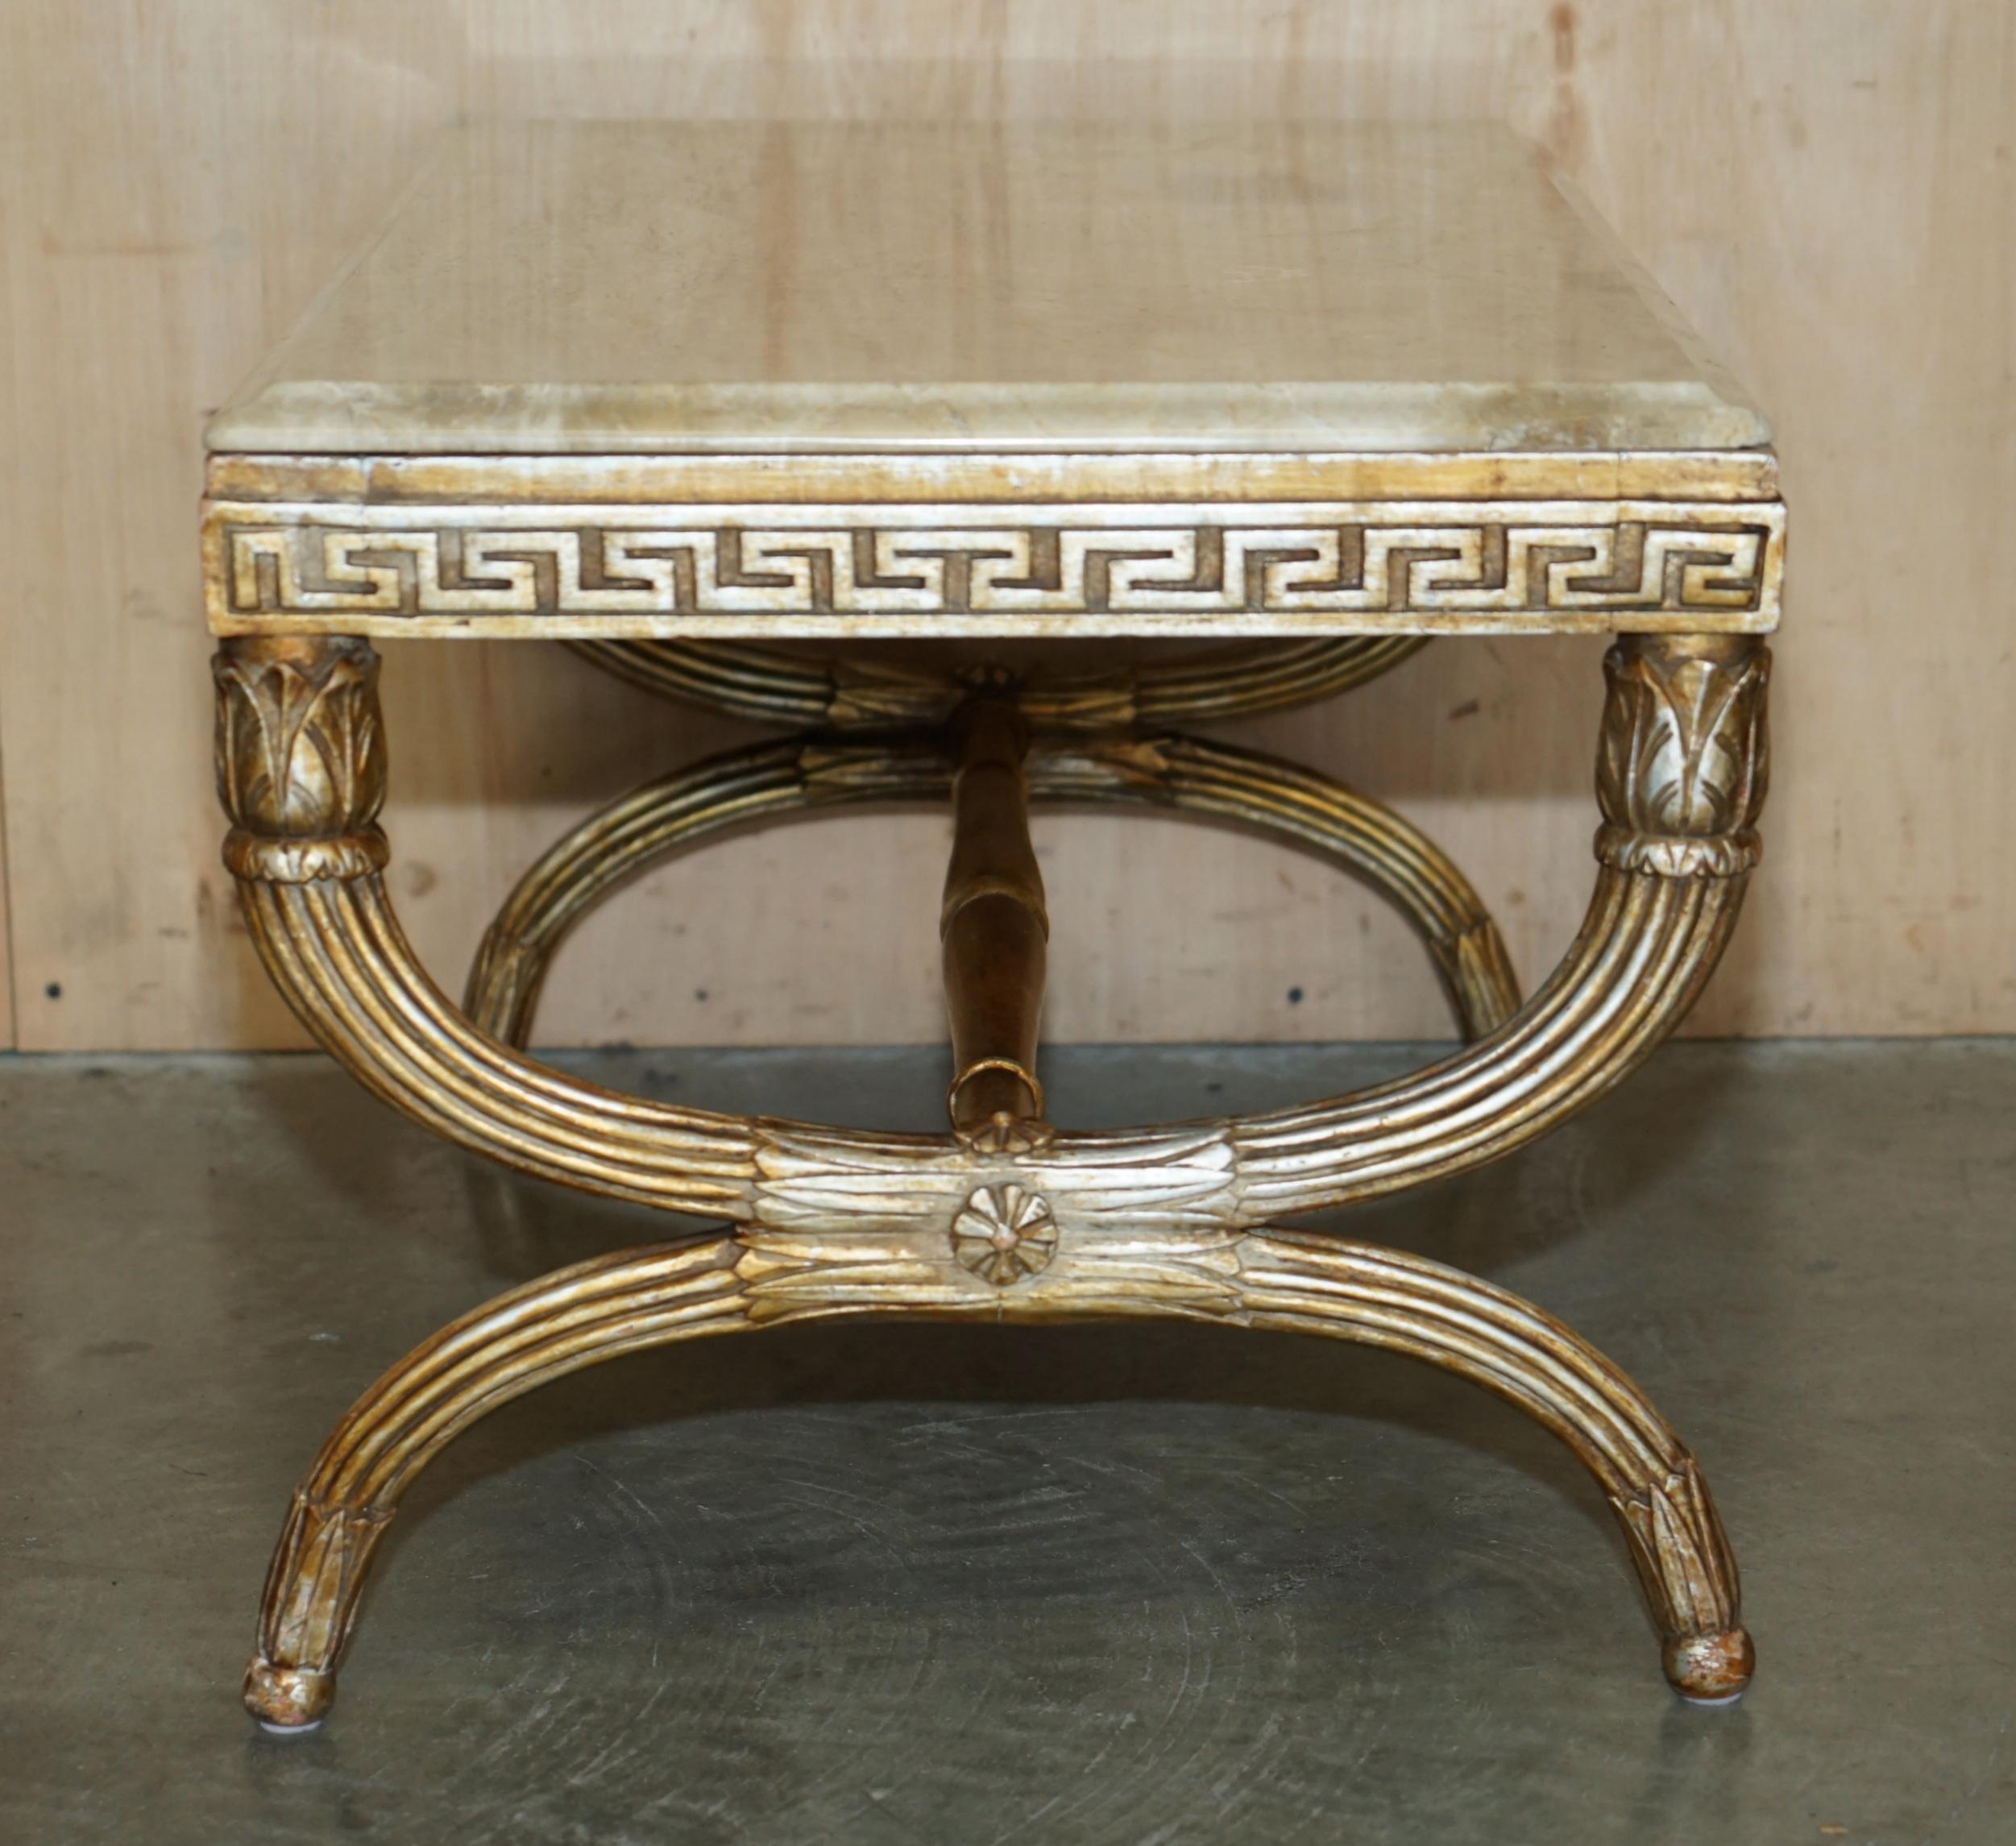 ANTIQUE ITALIAN CiRCA 1860 ORNATELY CARVED & GILTWOOD MARBLE TOPPED COFFEE TABLE For Sale 11